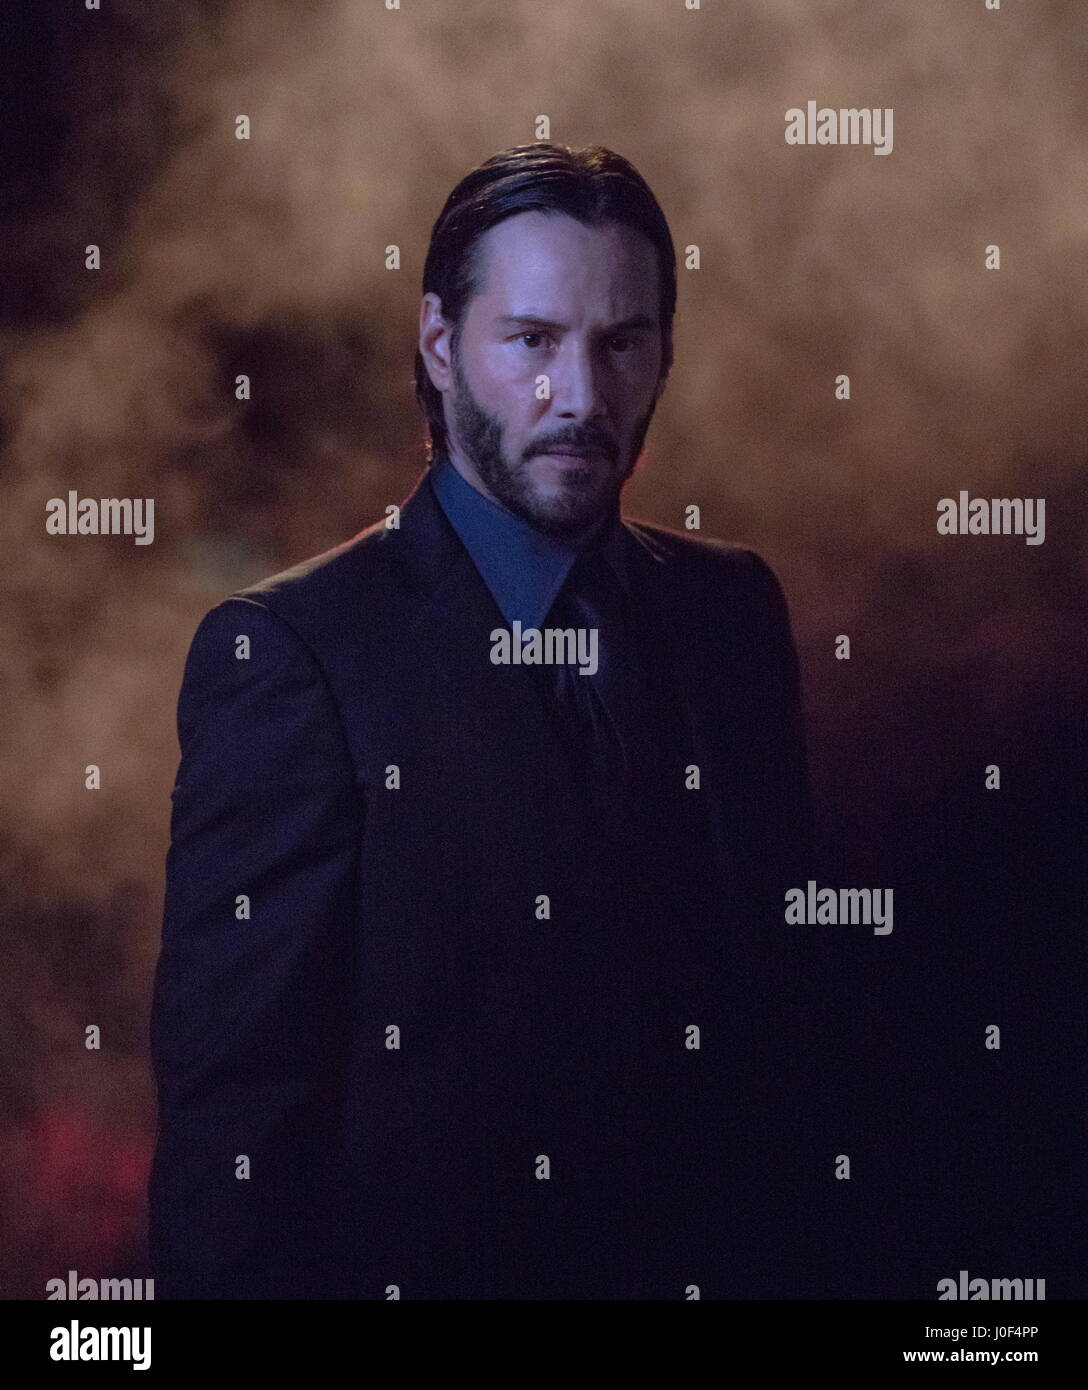 ELEASE DATE: February 10, 2017 TITLE: John Wick: Chapter 2 STUDIO: DIRECTOR: Chad Stahelski PLOT: The continuing adventures of former hitman, John Wick STARRING: Keanu Reeves as John Wick. (Credit: © Lionsgate/Entertainment Pictures) Stock Photo